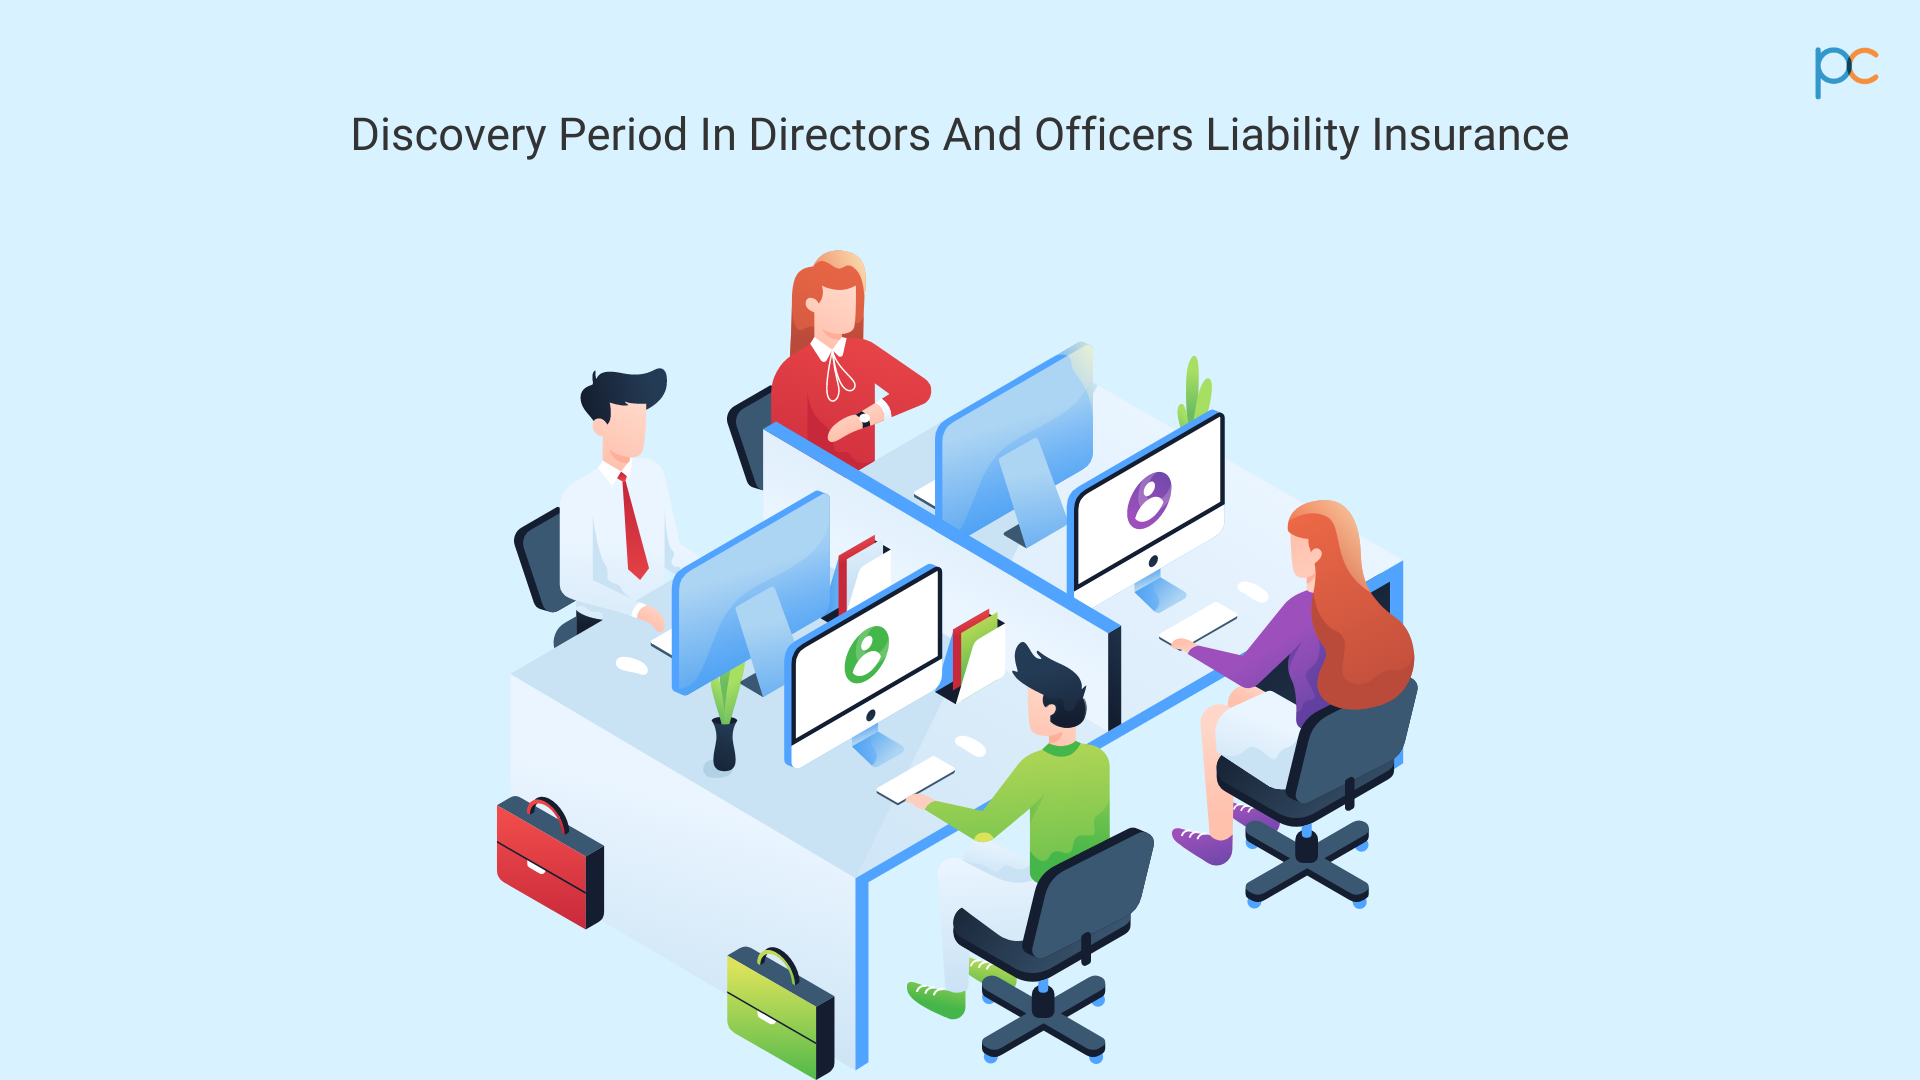 Discovery Period In Directors And Officers Insurance